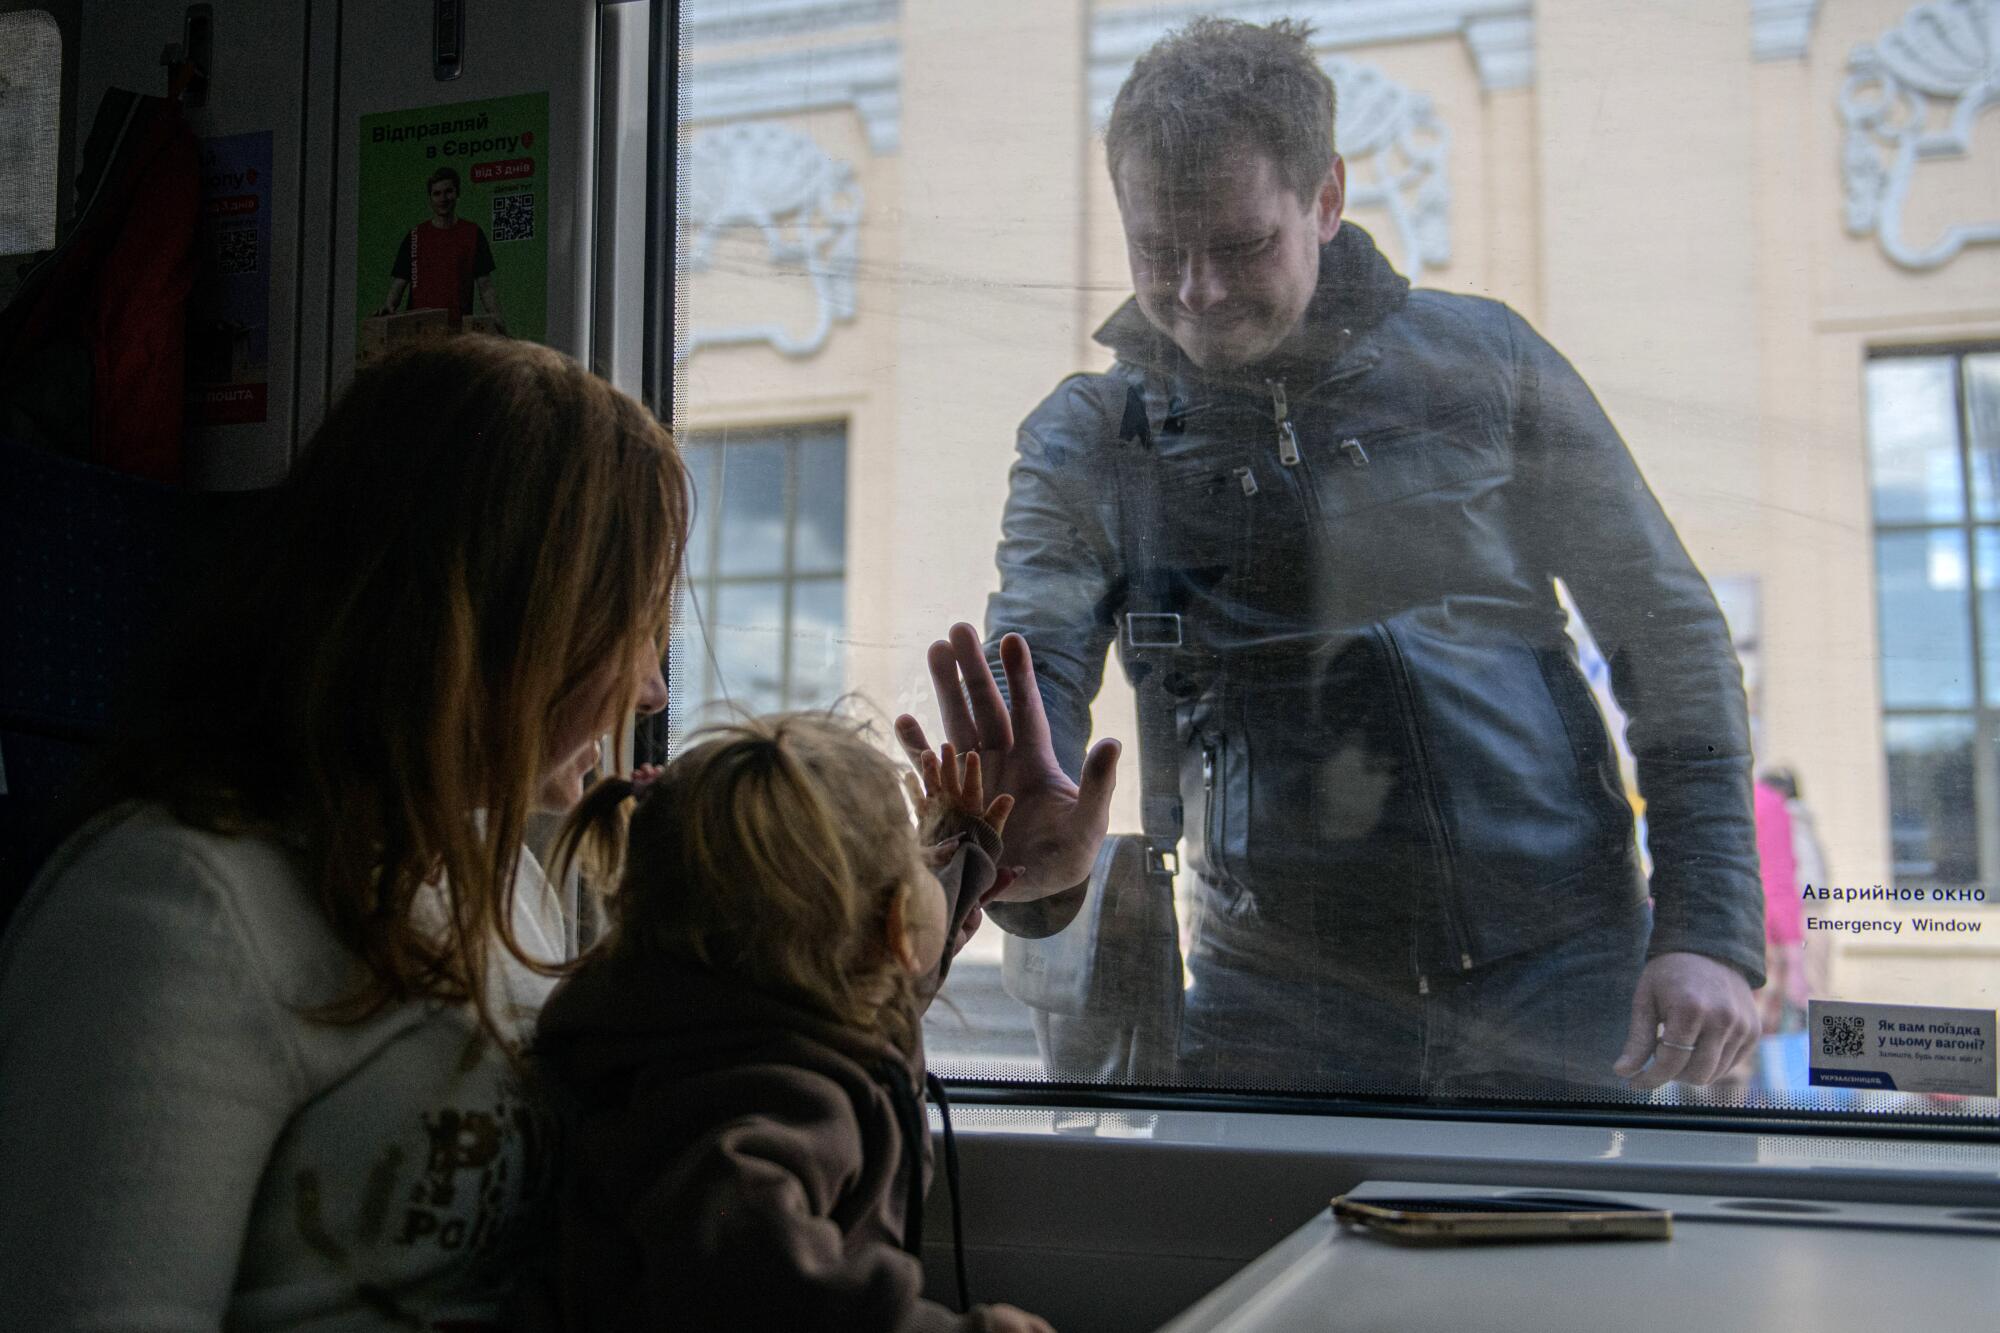 A man holds his palm to the glass window separating him from a woman and a child, who puts her palm to his.